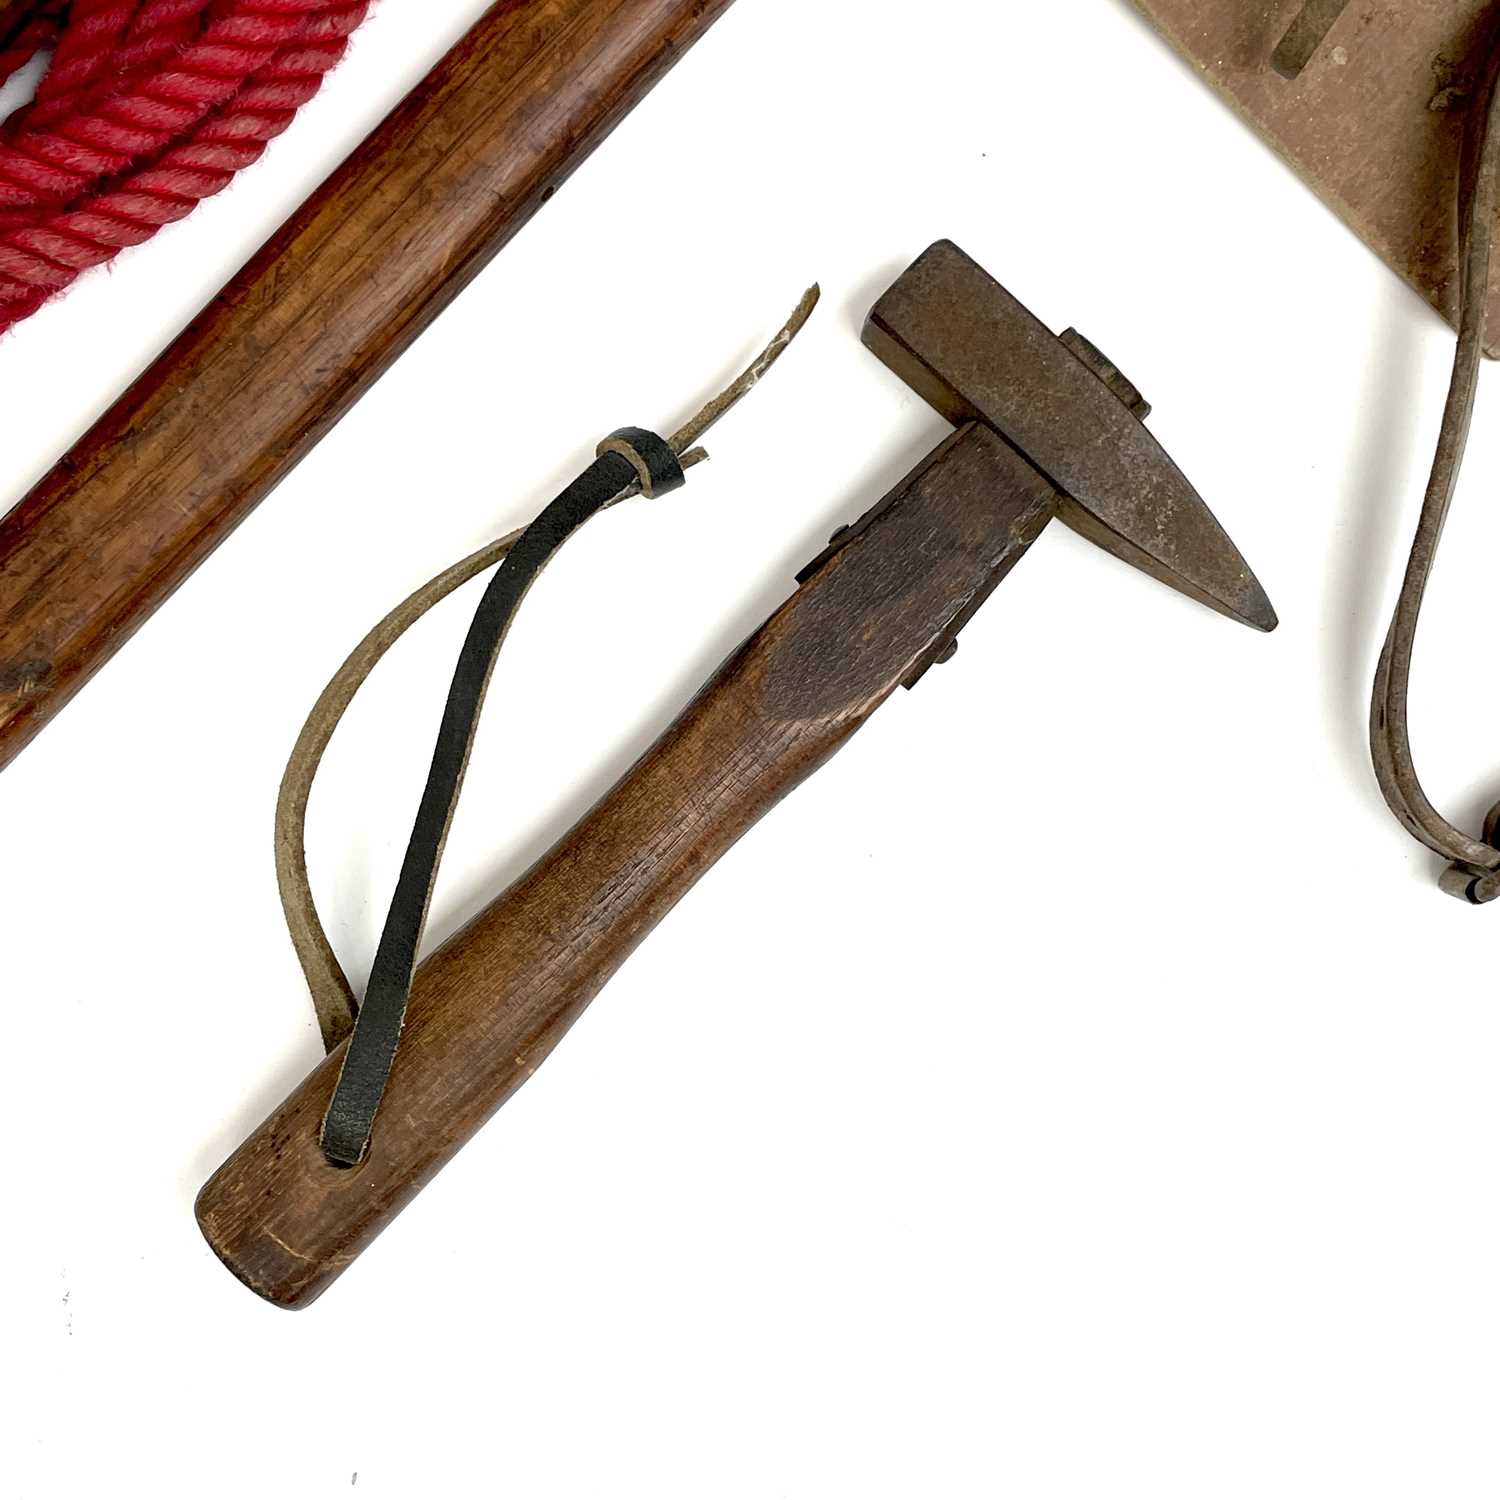 Vintage Mountaineering equipment, comprising two ice axes, a pair of crampons, a rope and a - Image 5 of 12